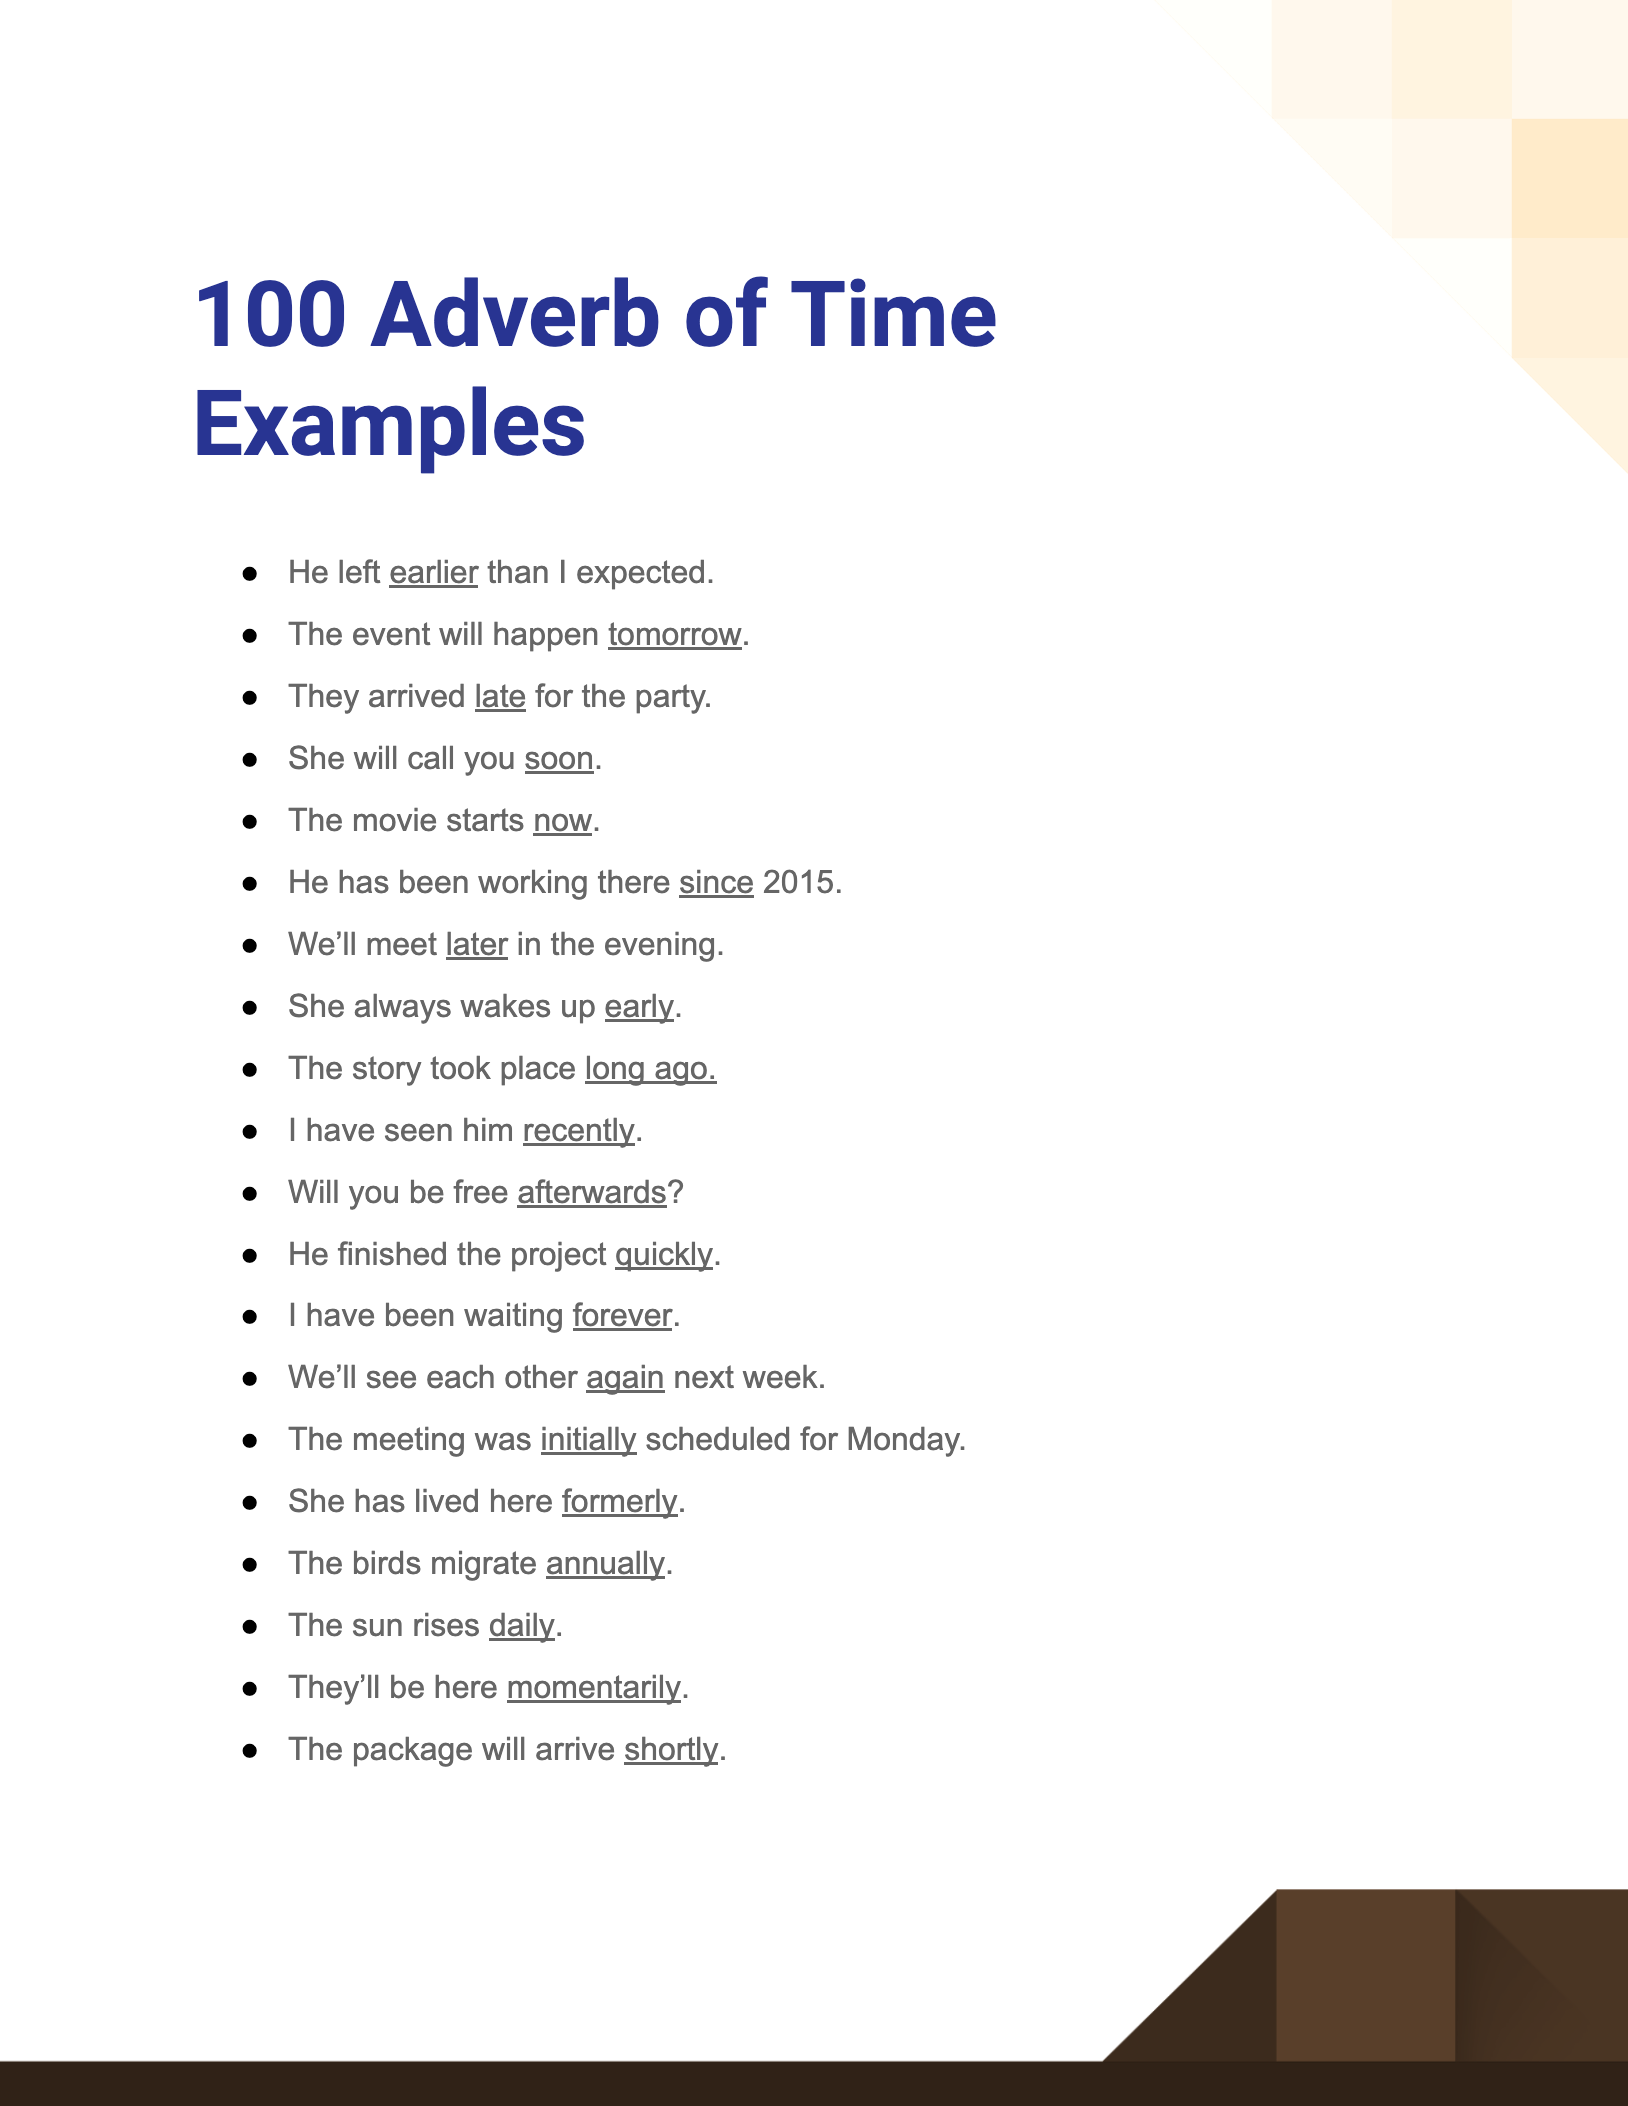 adverb of time examples